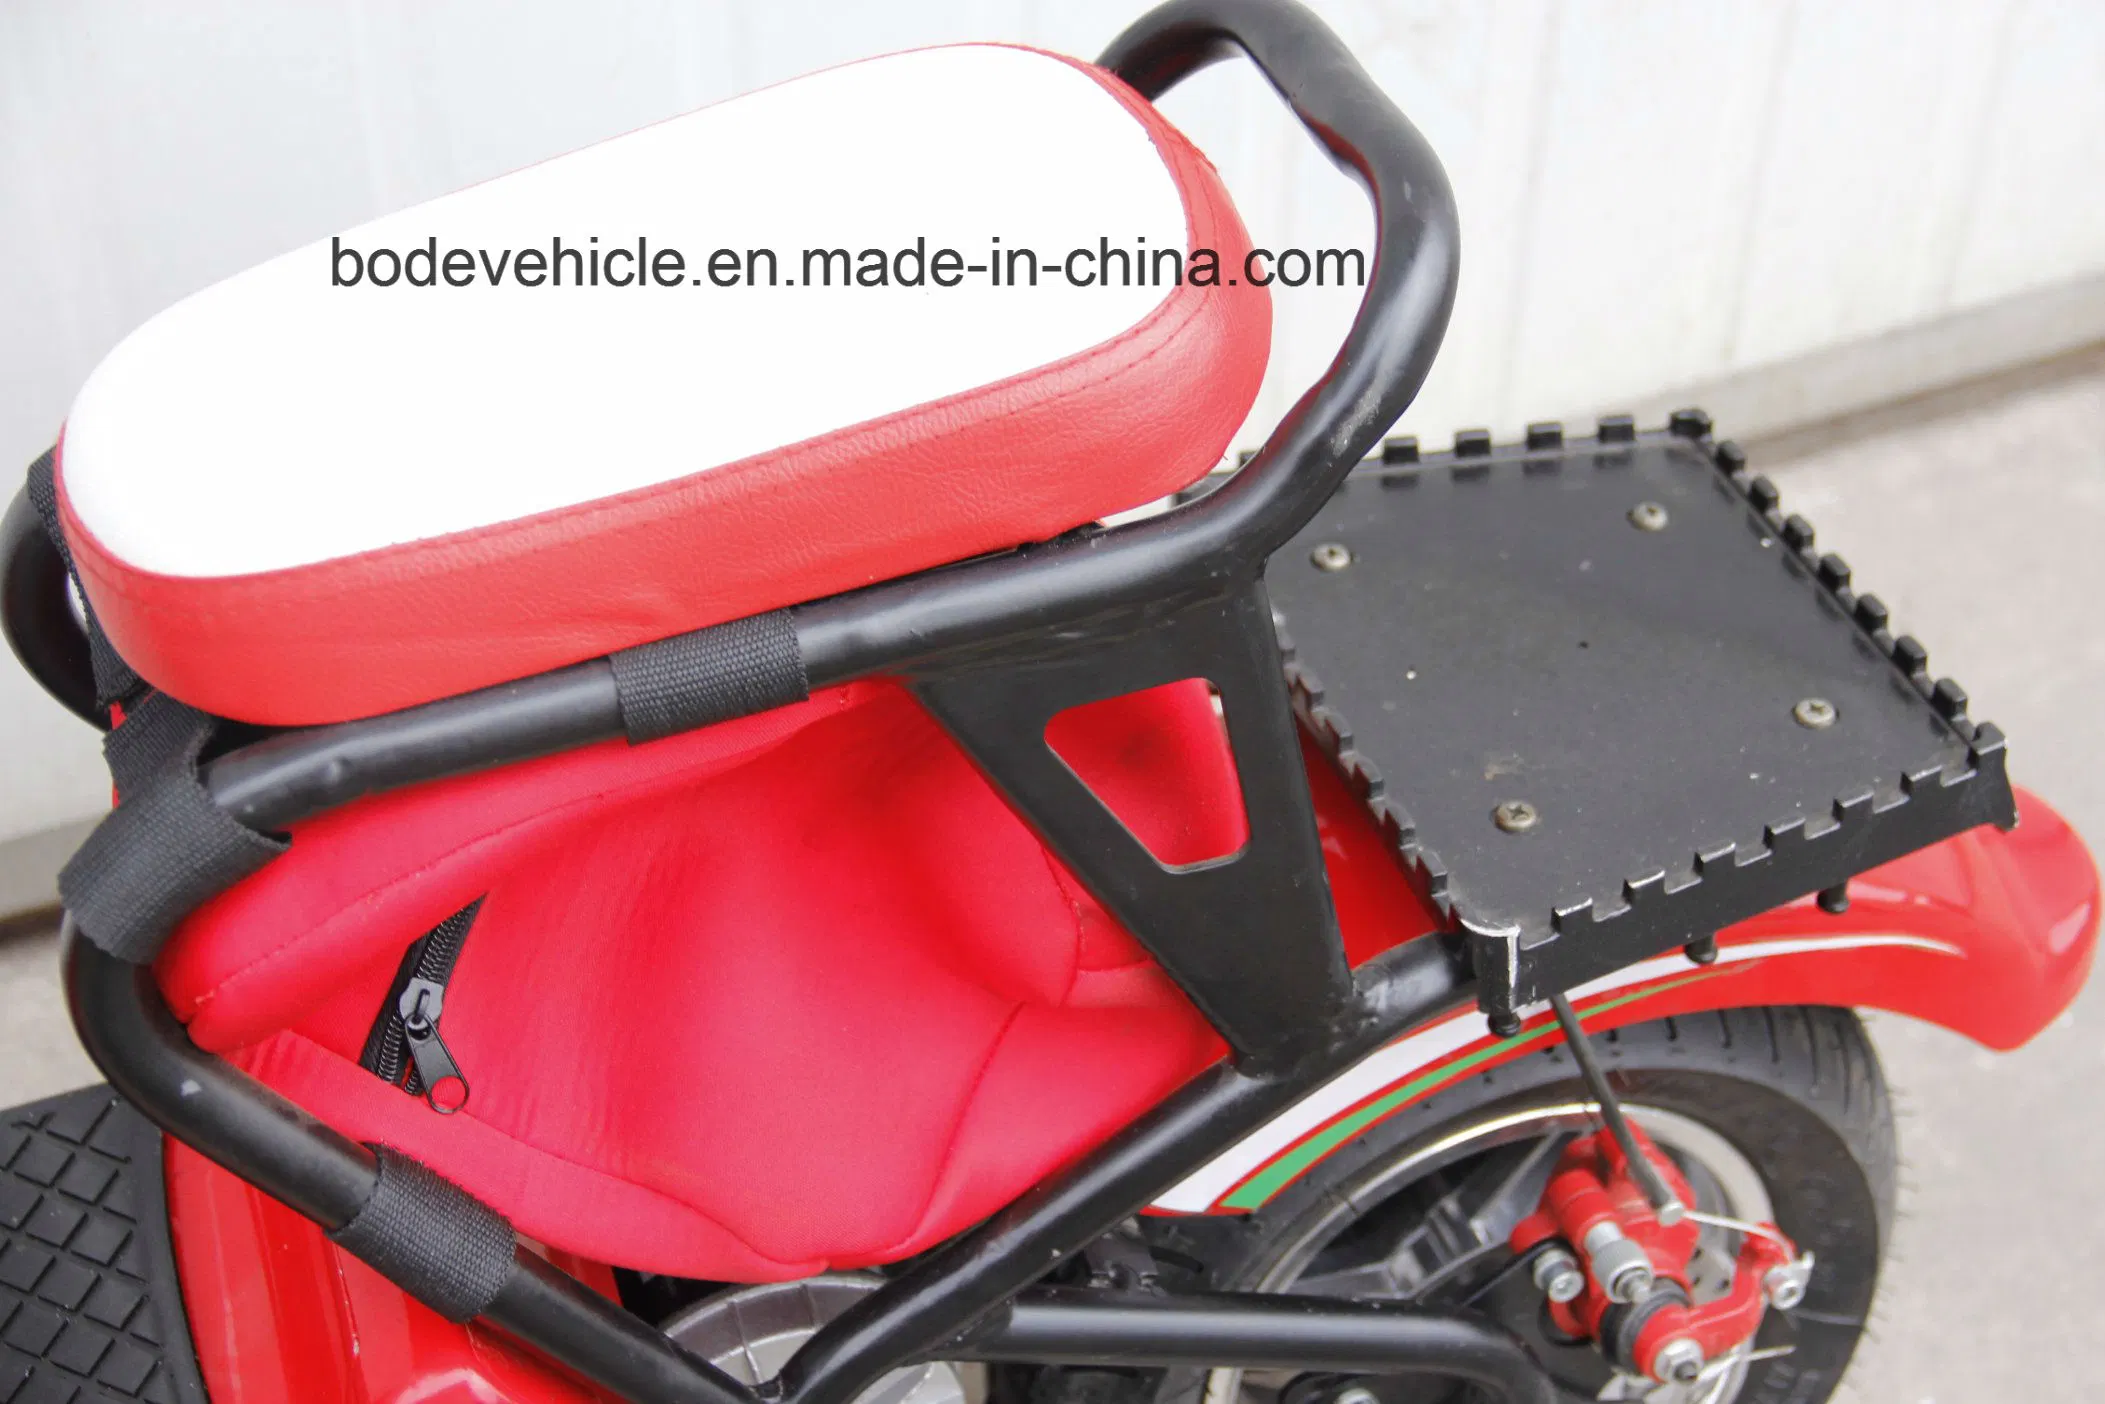 China New 350W Electric Motorcycle with Ce for Sale (mc-242)